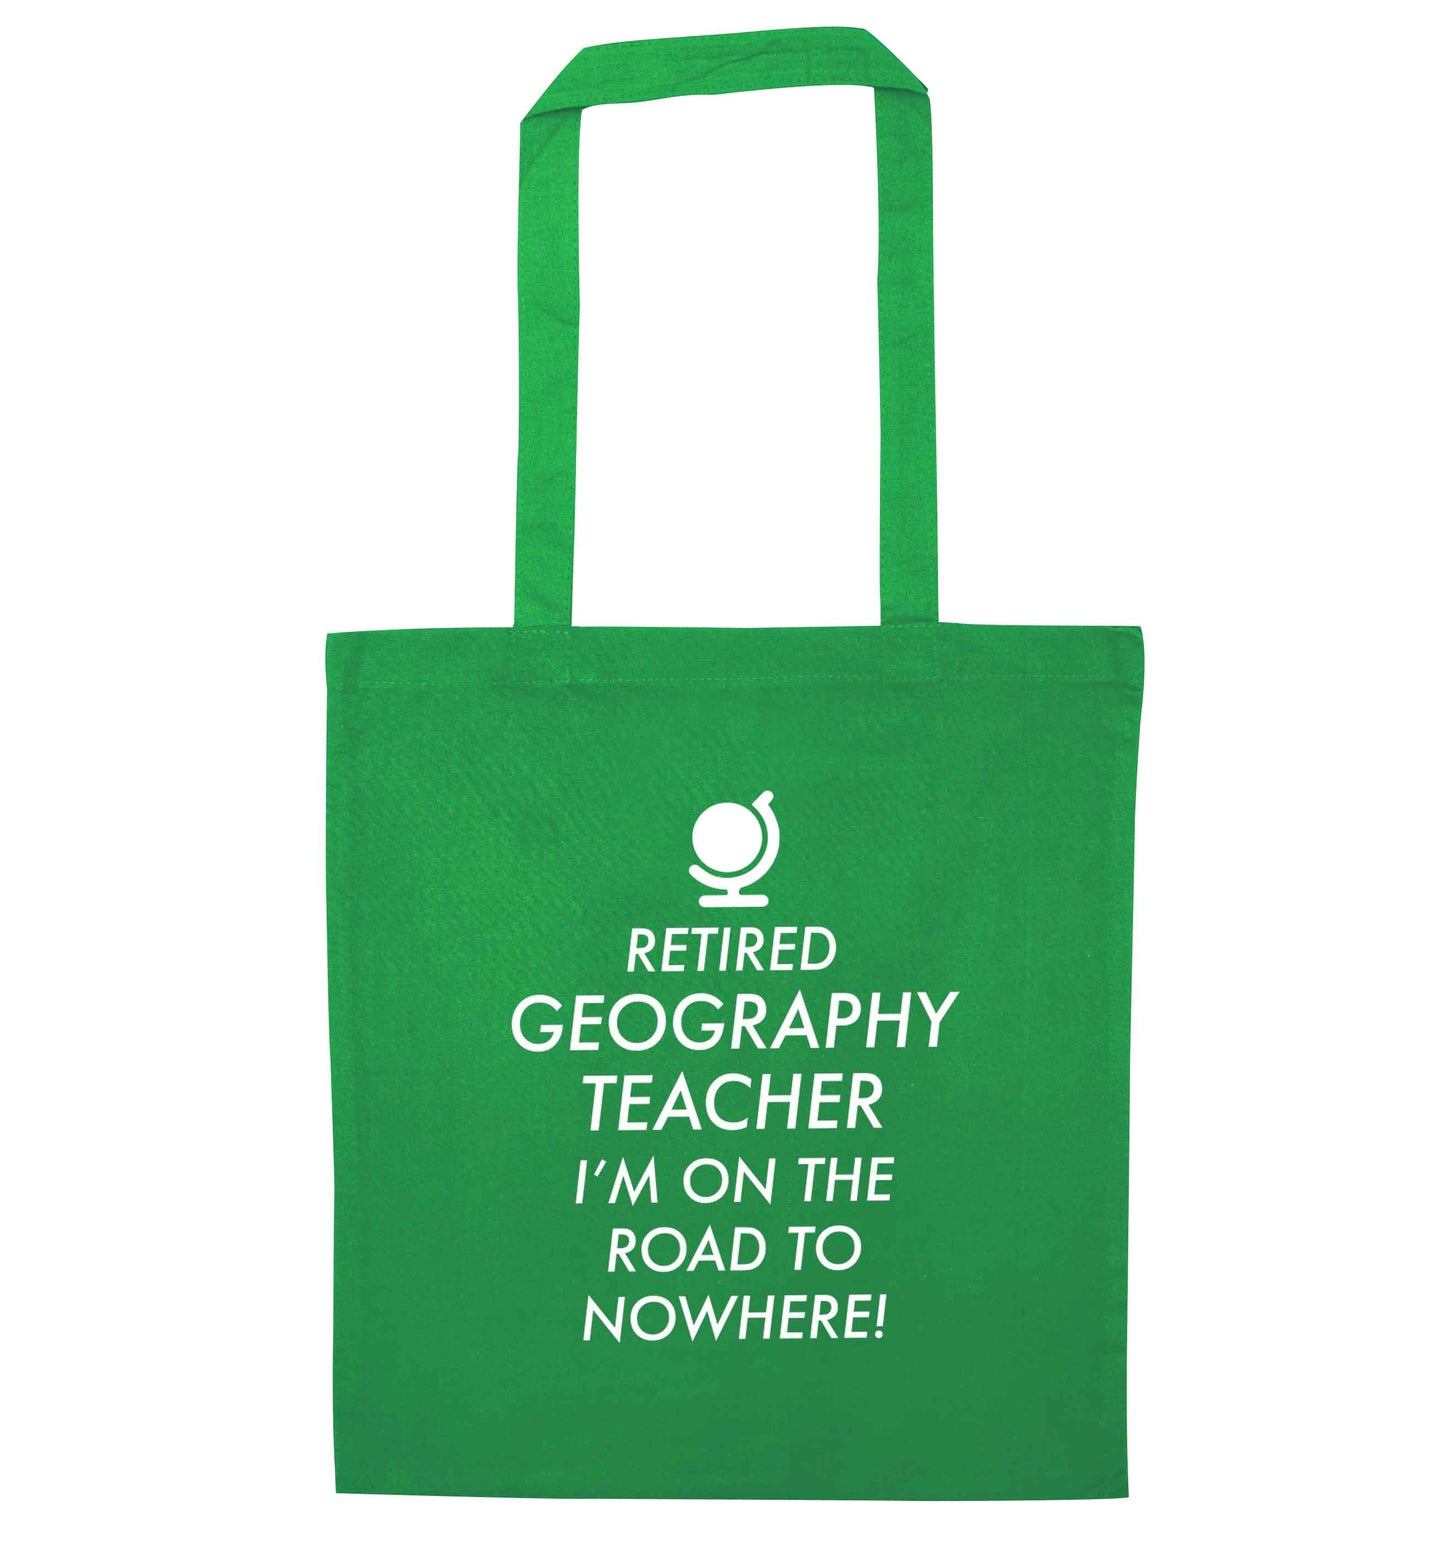 Retired geography teacher I'm on the road to nowhere green tote bag